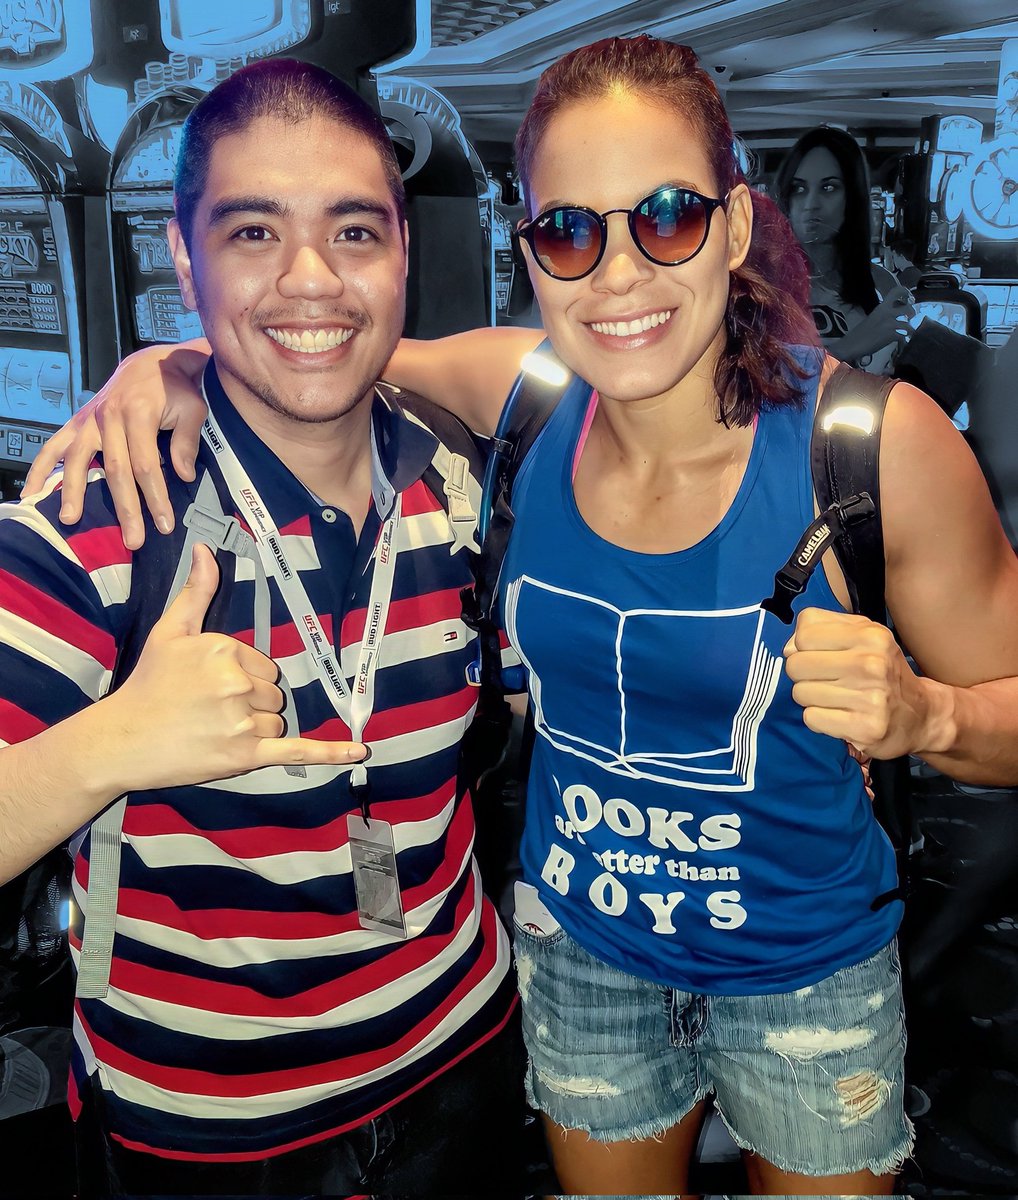 Congratulations #AmandaNuñes on an amazing career! Enjoy retirement 🦁. The only time I met her was 2016 IFW, fight week before she beat Miesha for the title. #UFC289 #AndStill #DoubleChamp